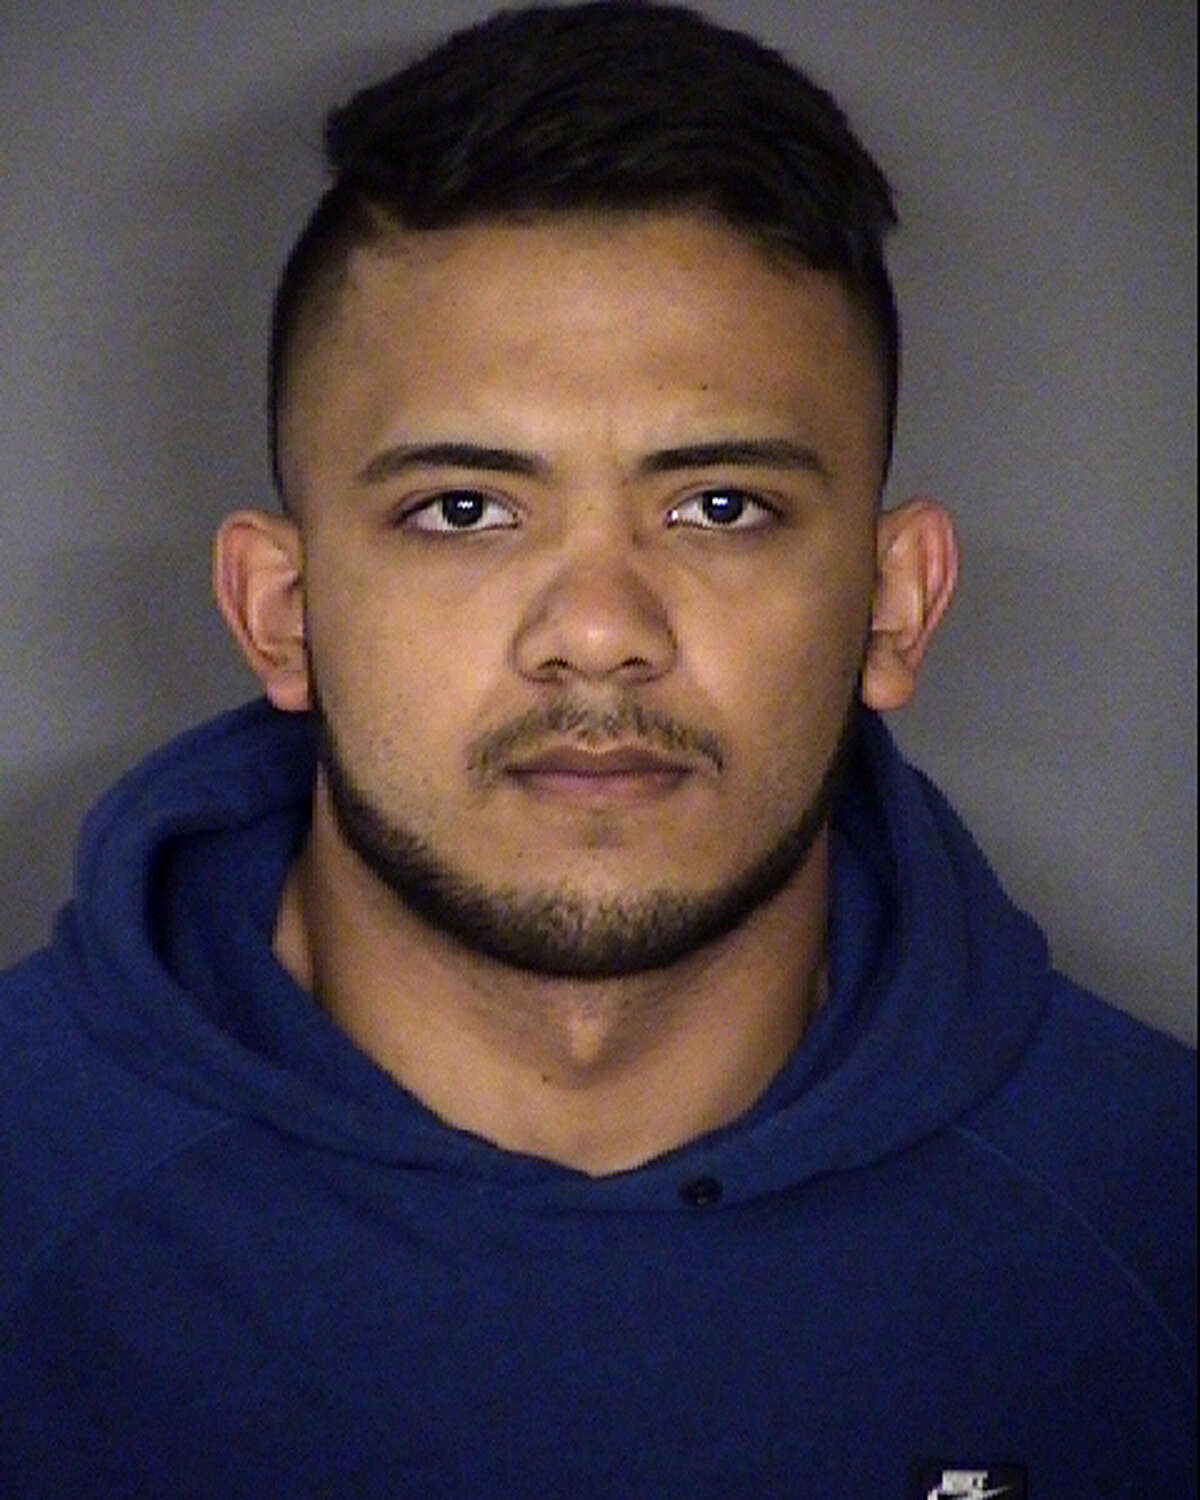 Jeremy Christ Villafuerte, 19, was arrested Jan. 29, 2017, on first-degree felony charges of aggravated kidnapping and aggravated robbery, said BCSO spokeswoman Rosanne Hughes.